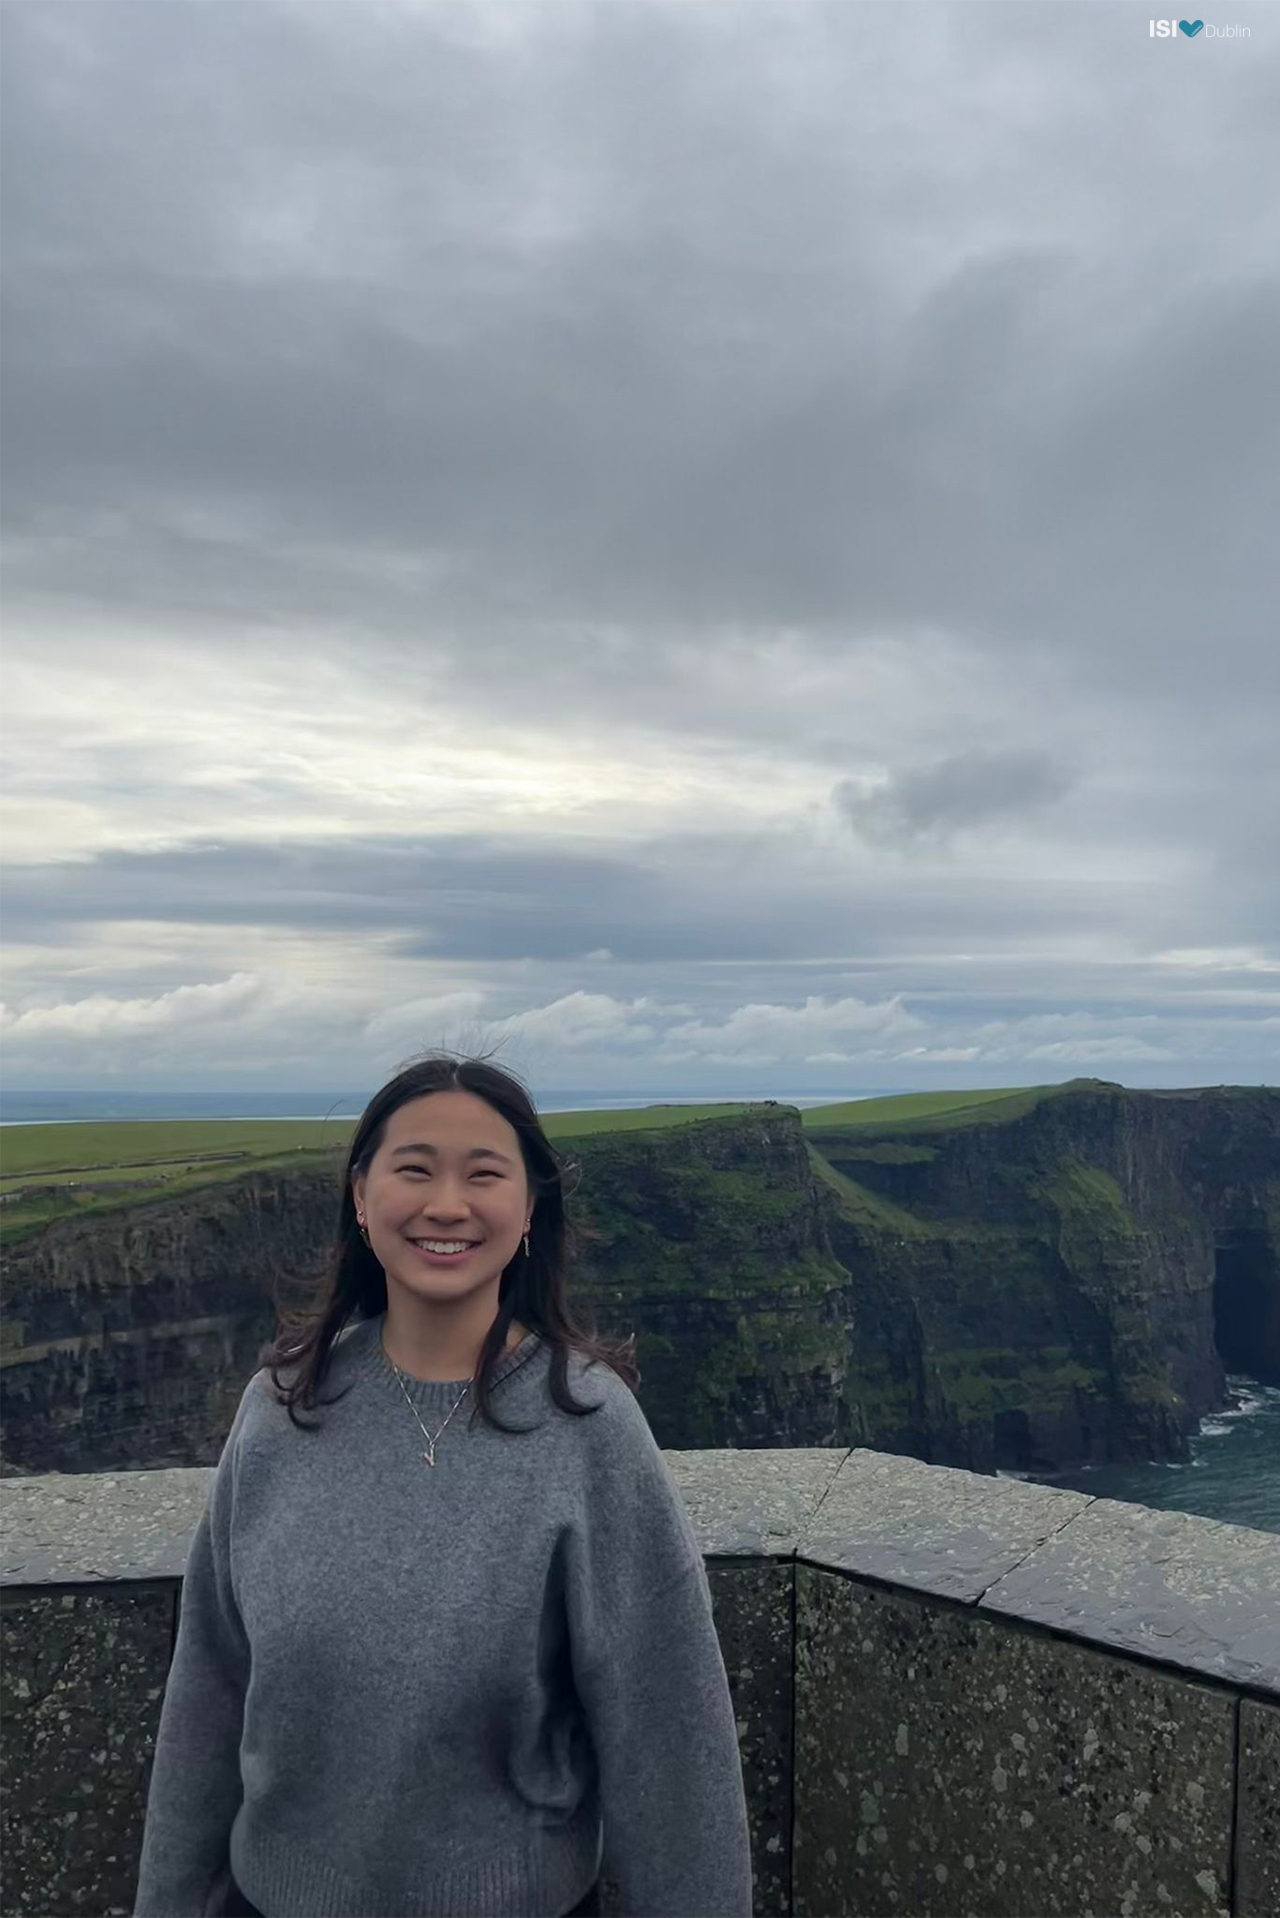 Yichan from Grange Community School at the Cliffs of Moher